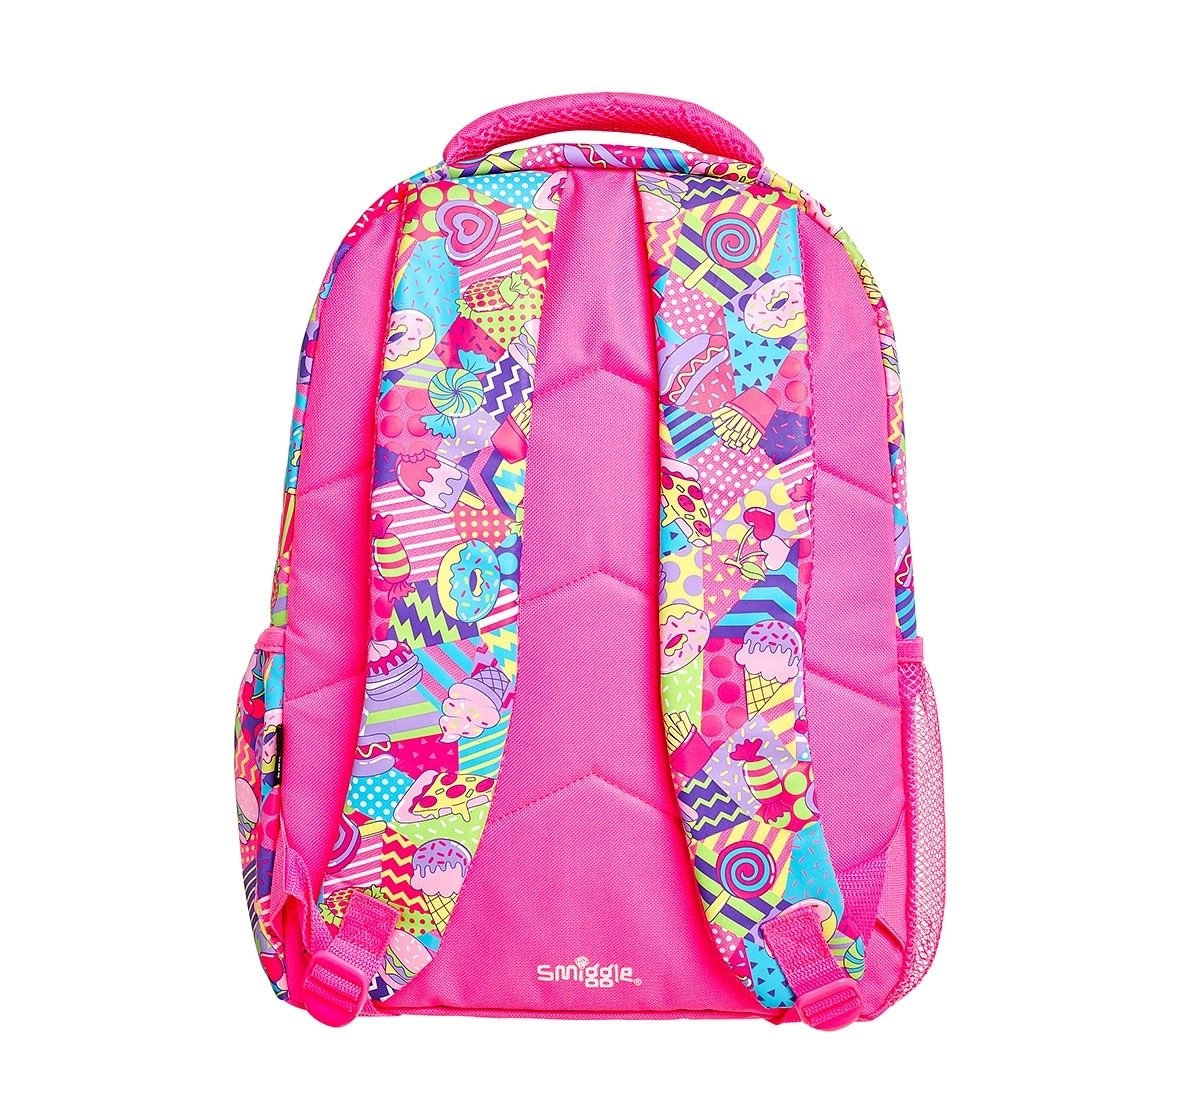 Smiggle Far Away Backpack - Ice-cream Print Bags for Kids age 3Y+ (Pink)